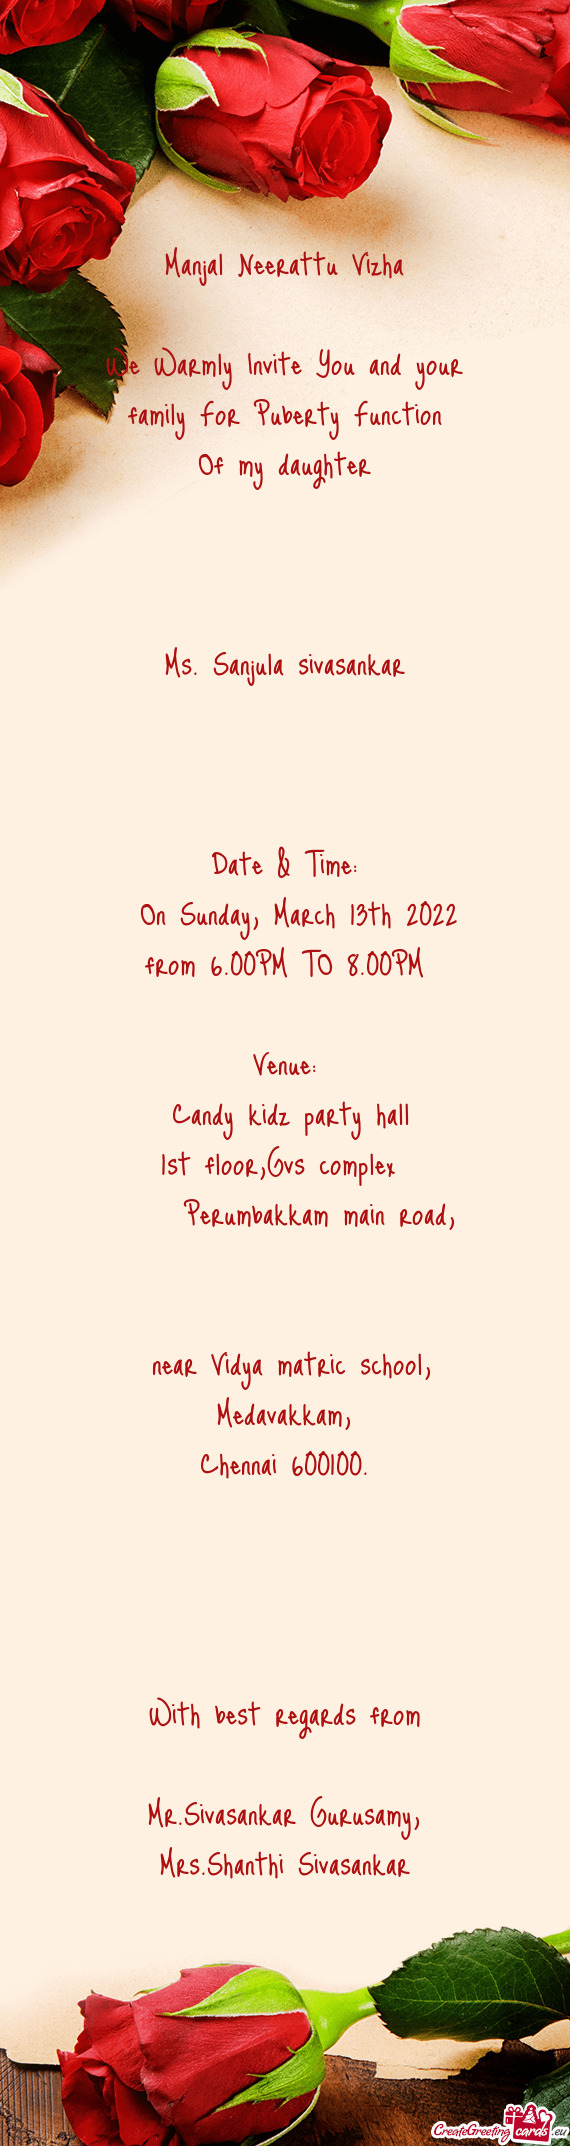 Candy kidz party hall